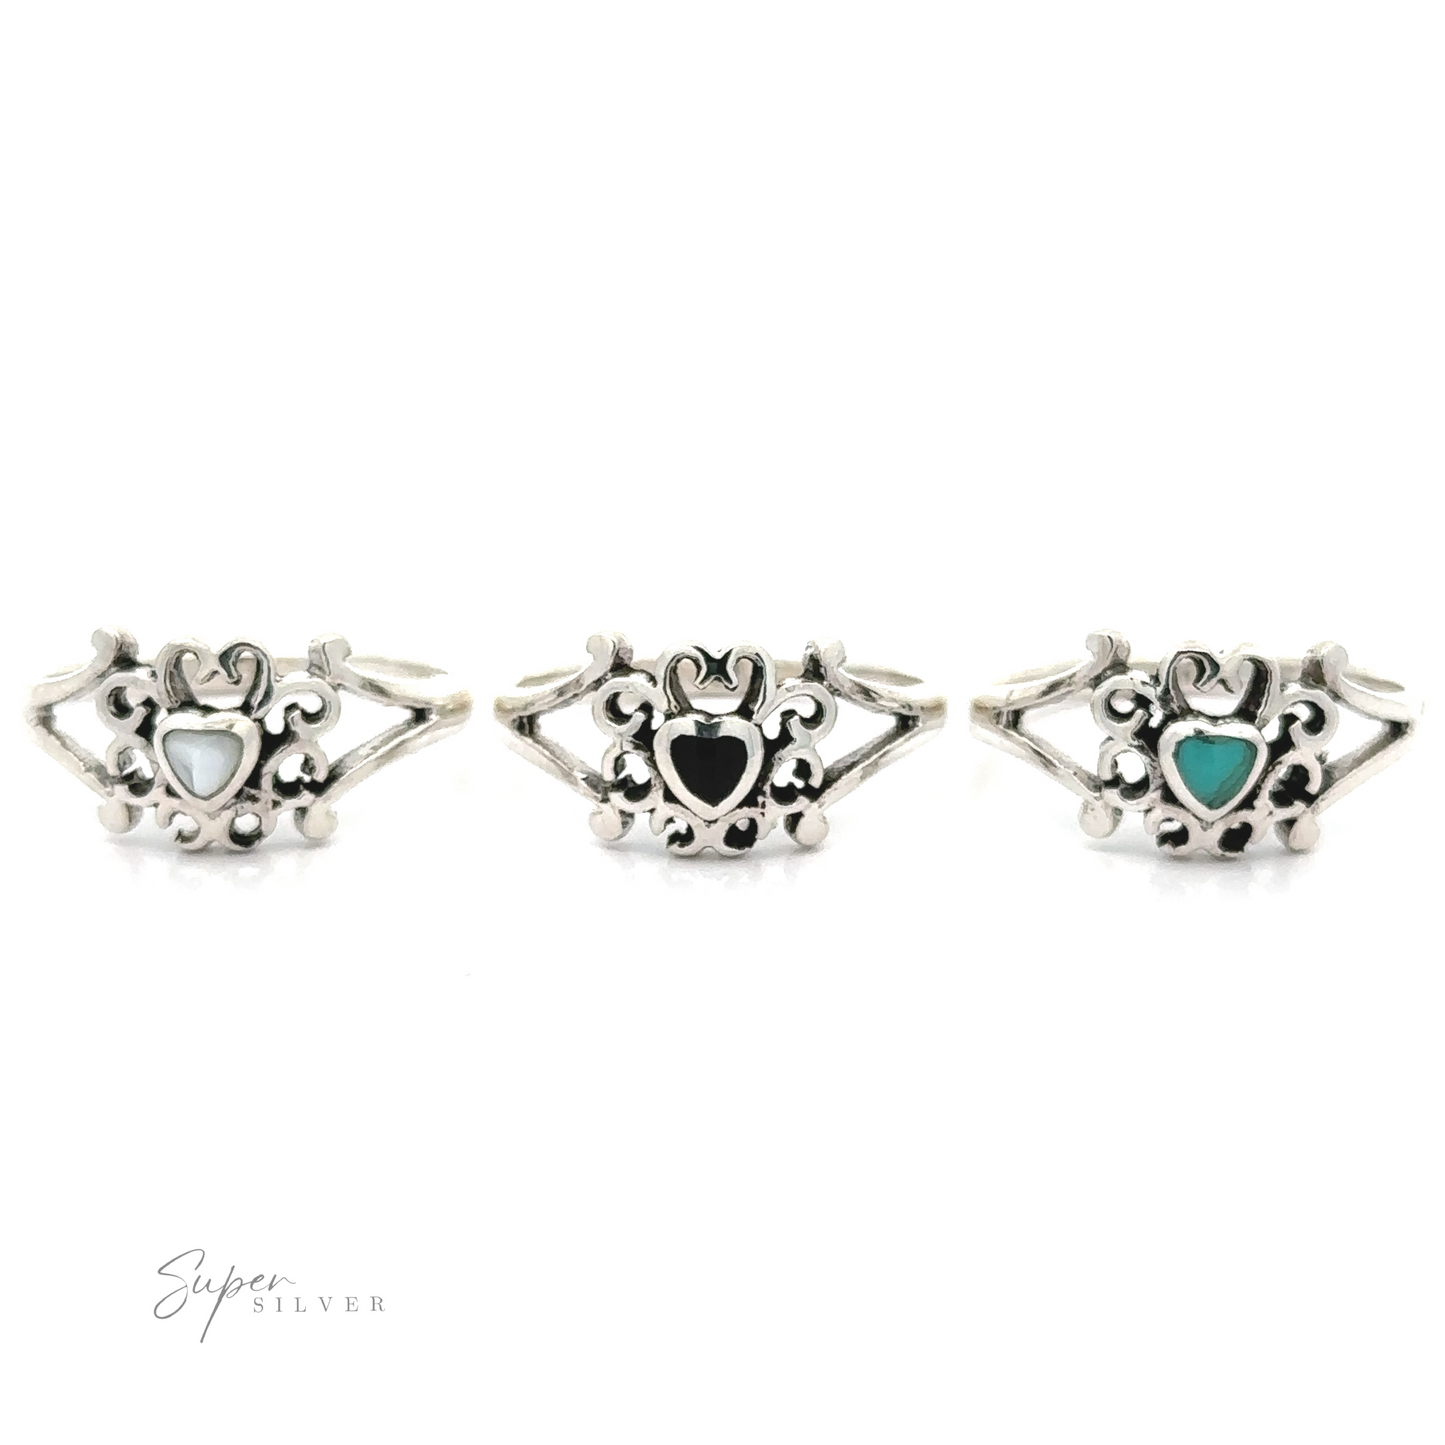 Three sterling silver rings with turquoise stones on them, featuring Filigree Design Surround Inlaid Stone Heart designs.